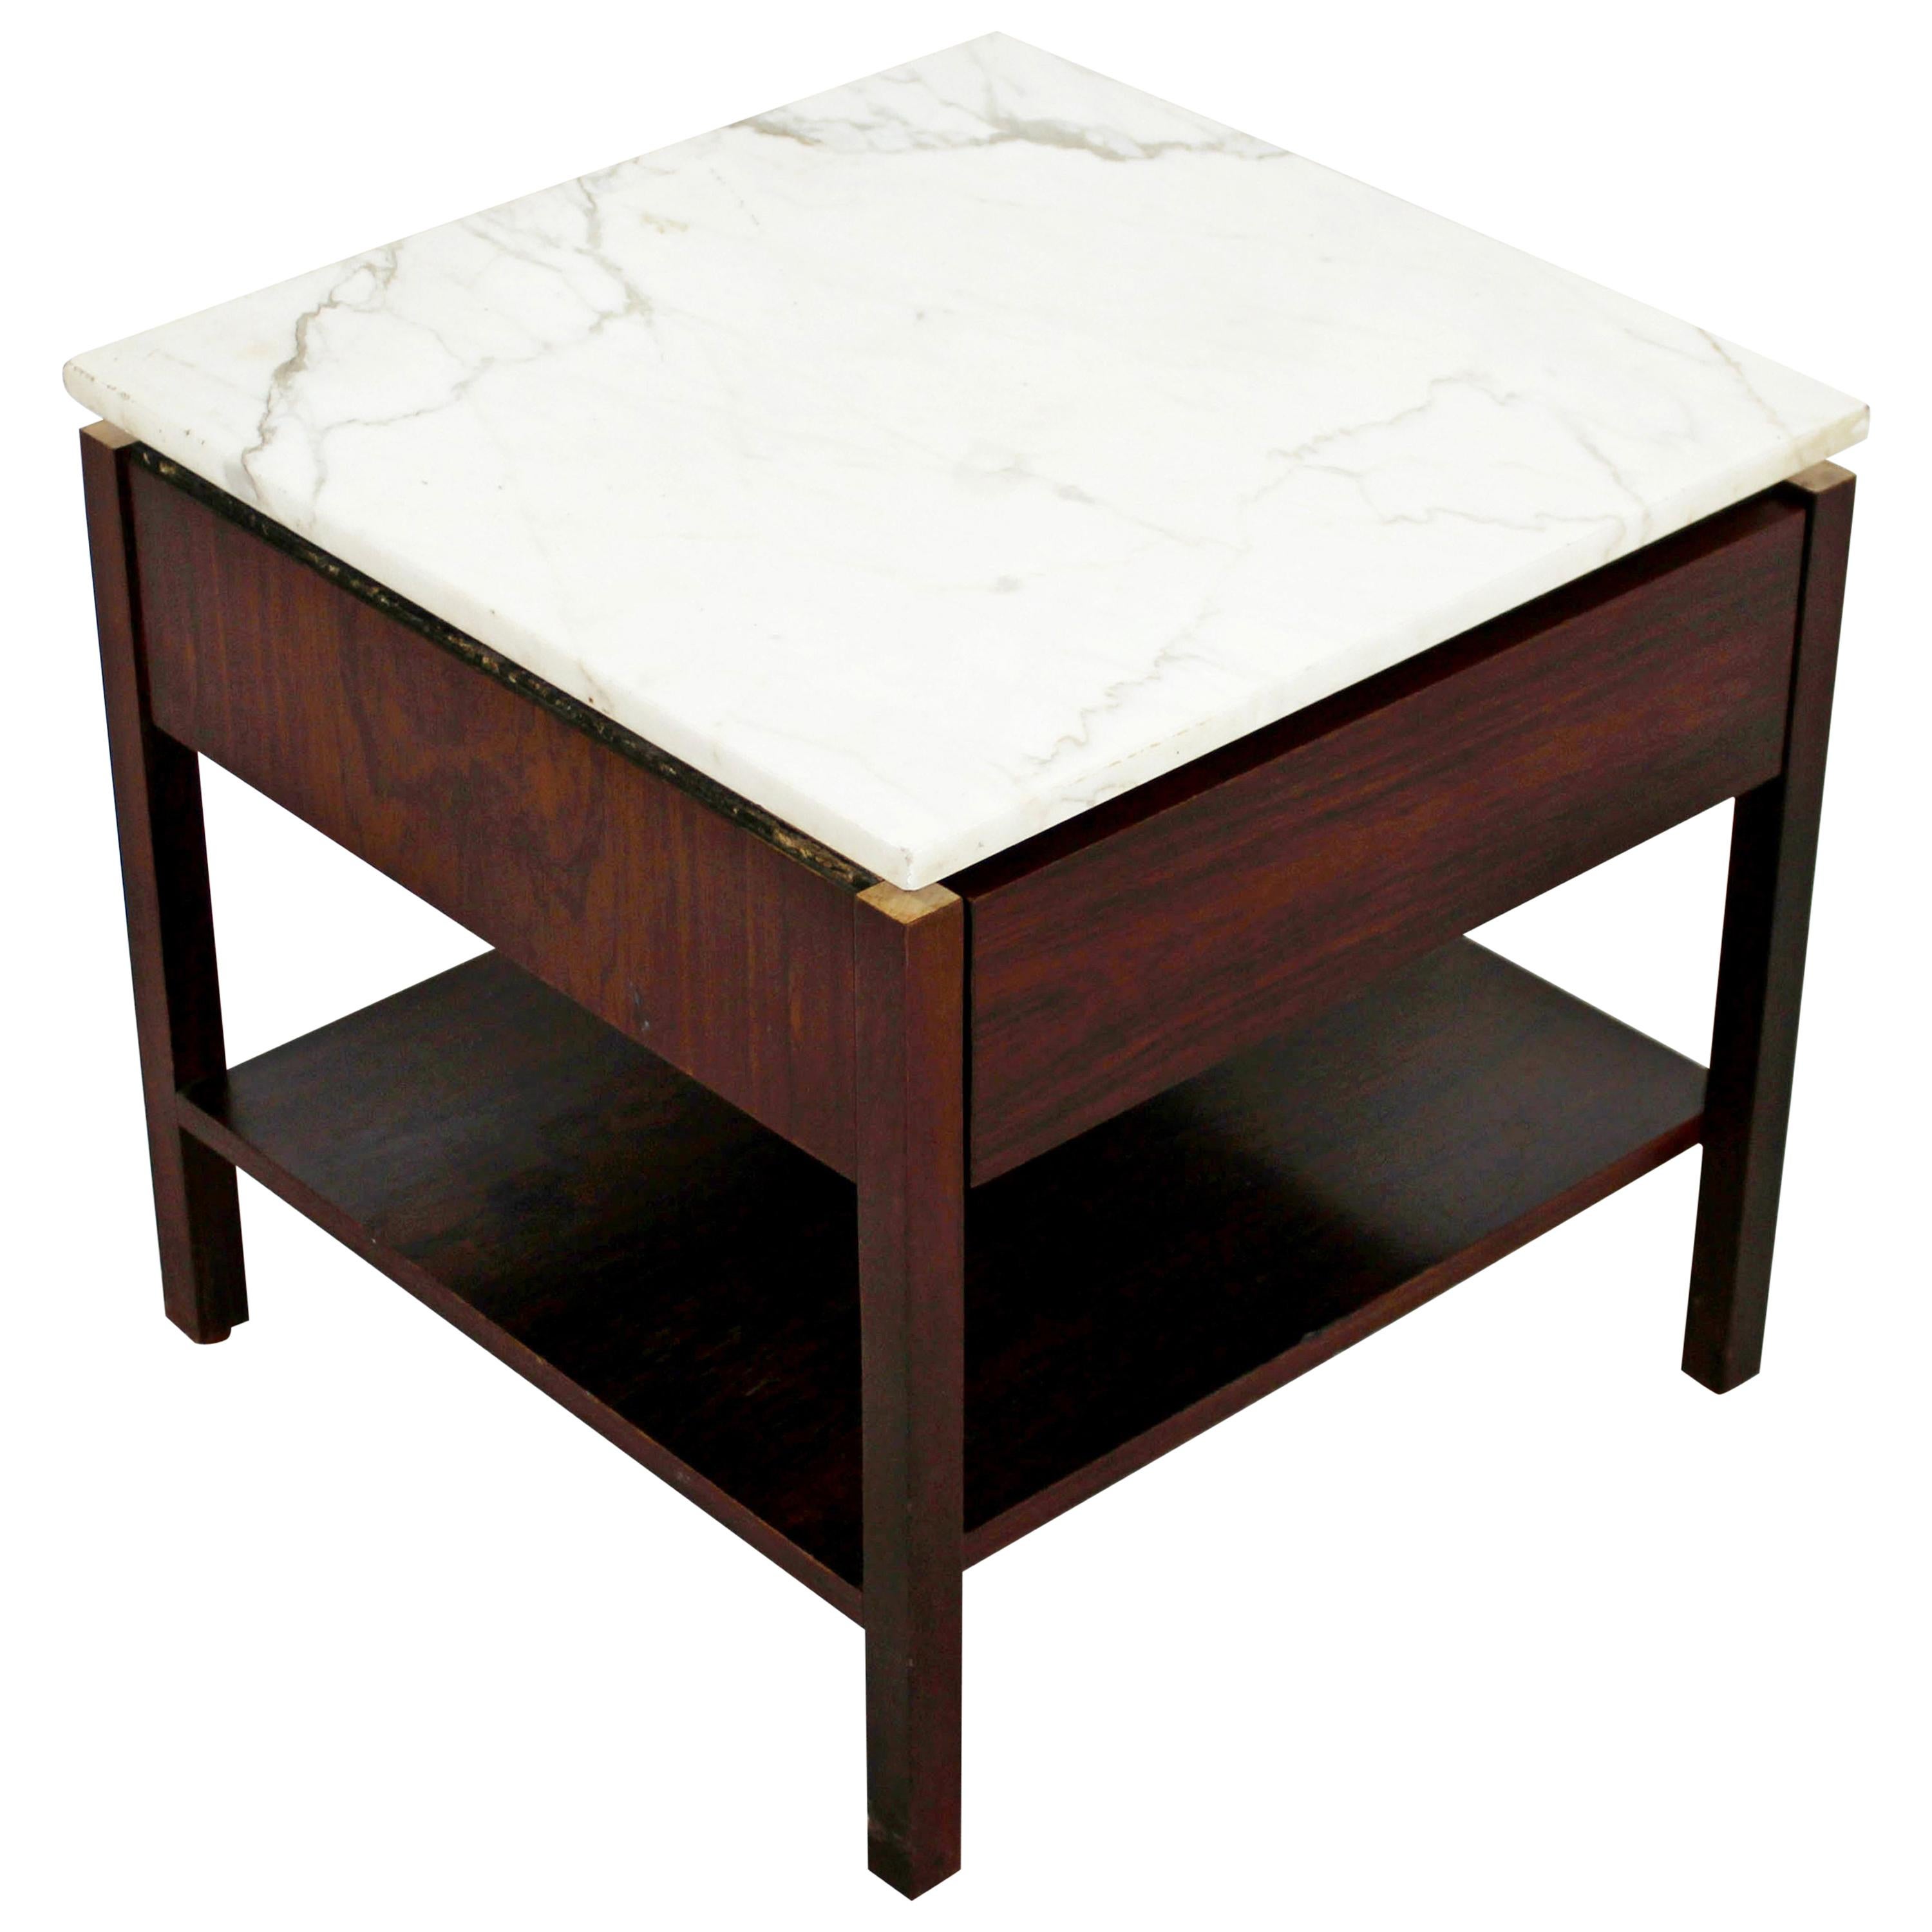 For your consideration is a sweet, marble topped, rosewood side table or nightstand, with one-drawer, by Knoll, circa 1960s. In good vintage condition. The dimensions are 19.5